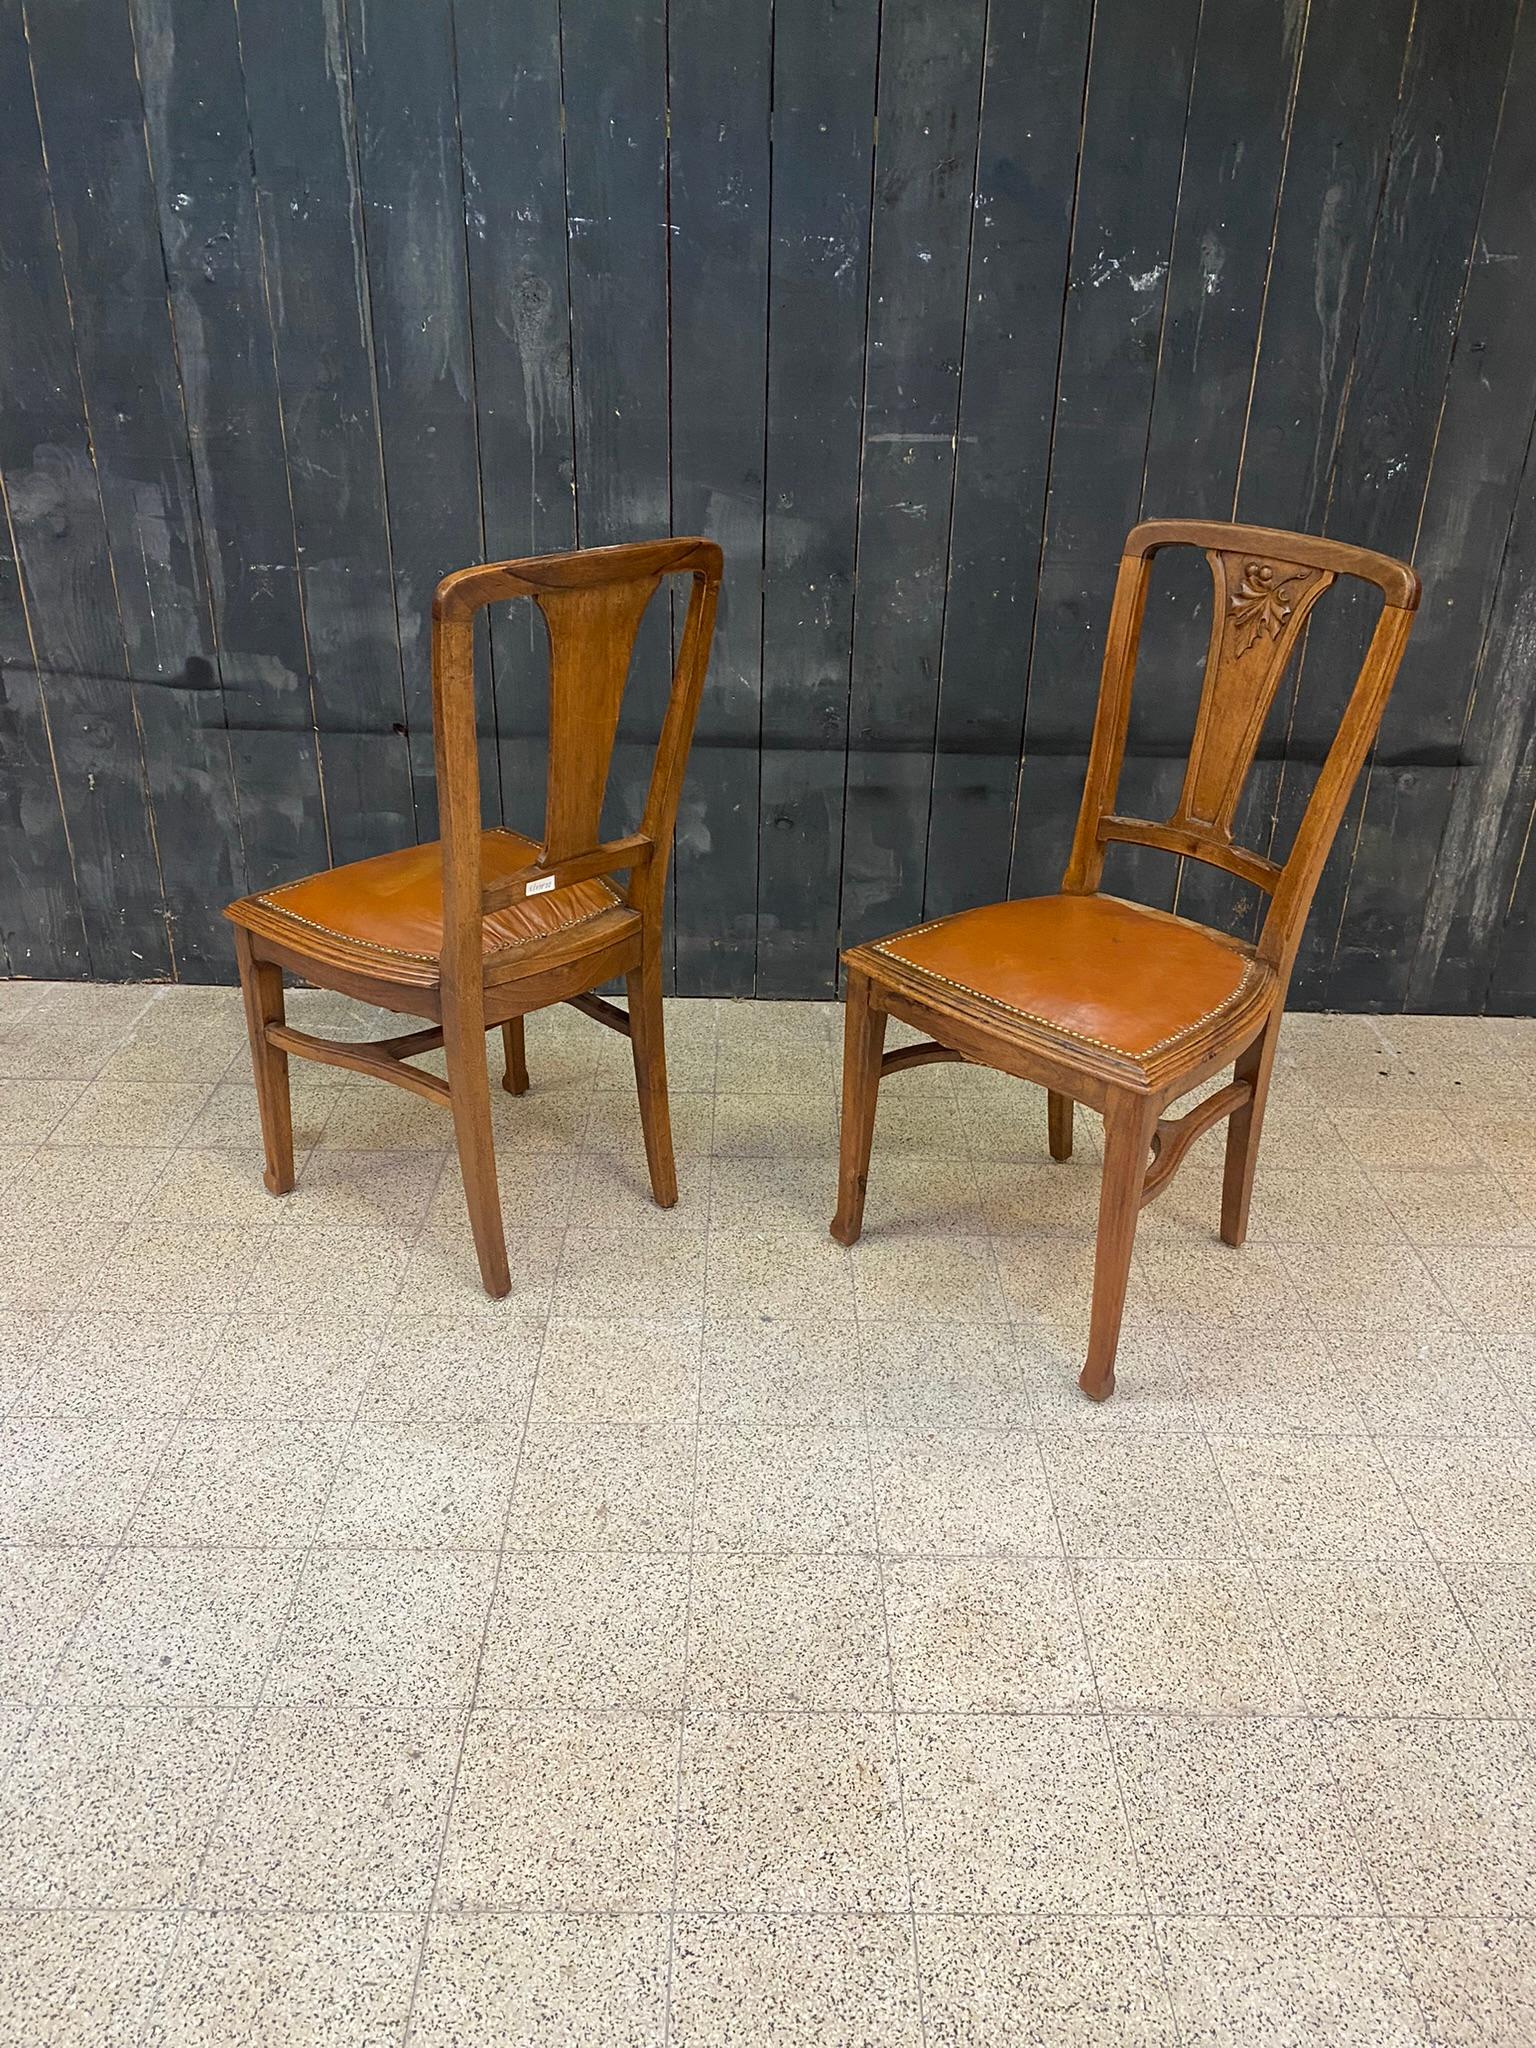 Attributed to Gauthier-Poinsignon & Cie, 6 Art Nouveau Chairs Leather Seats 2